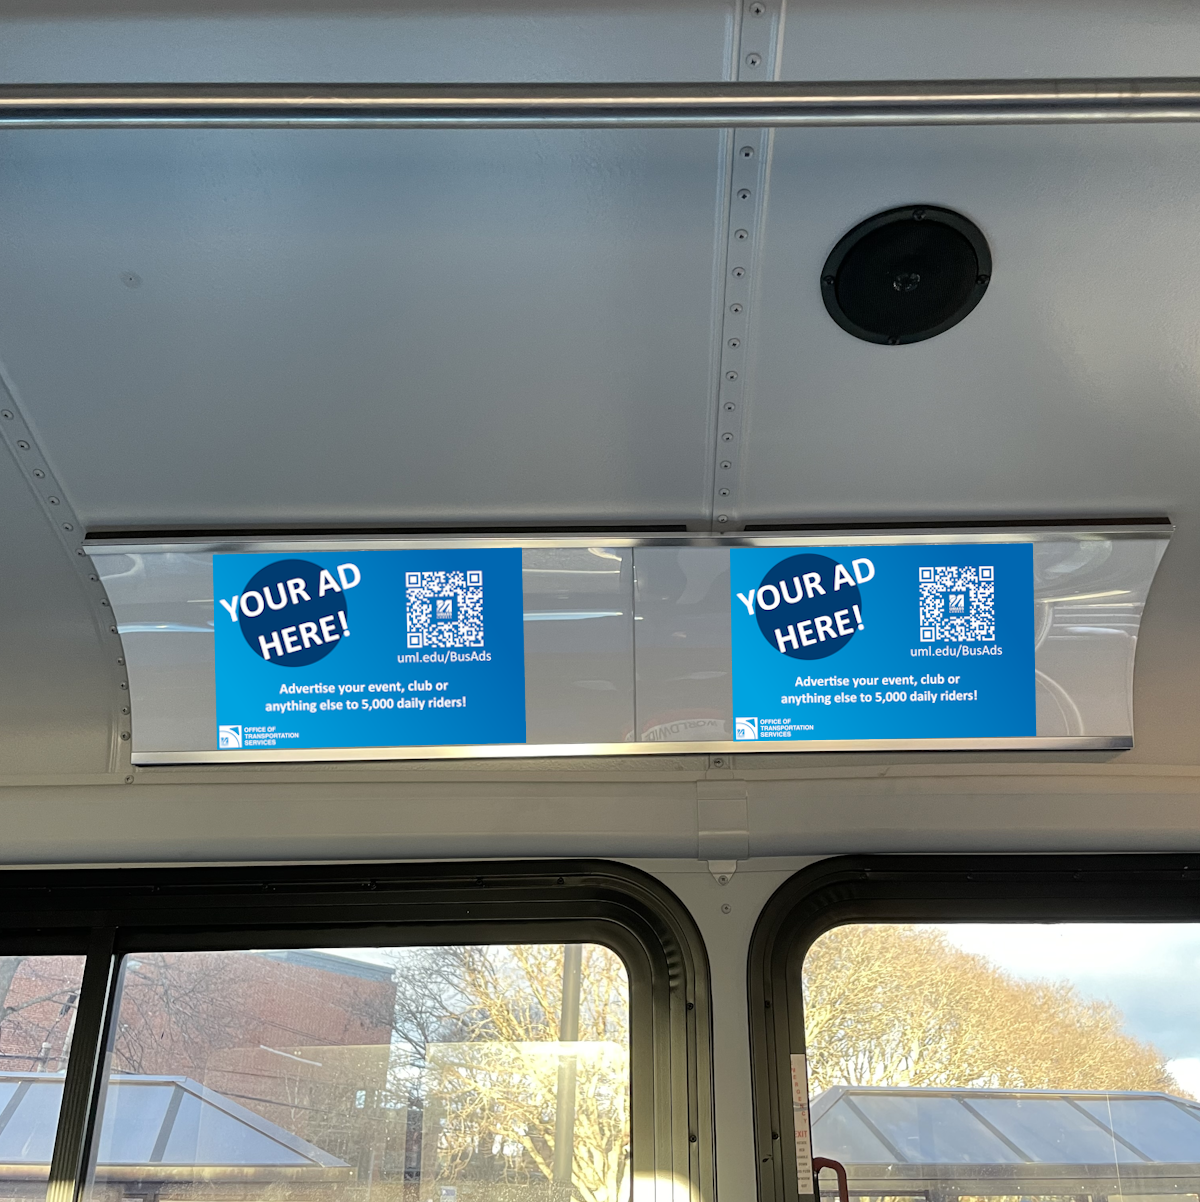 Two blue example advertisements are displayed inside a bus, hung above the window